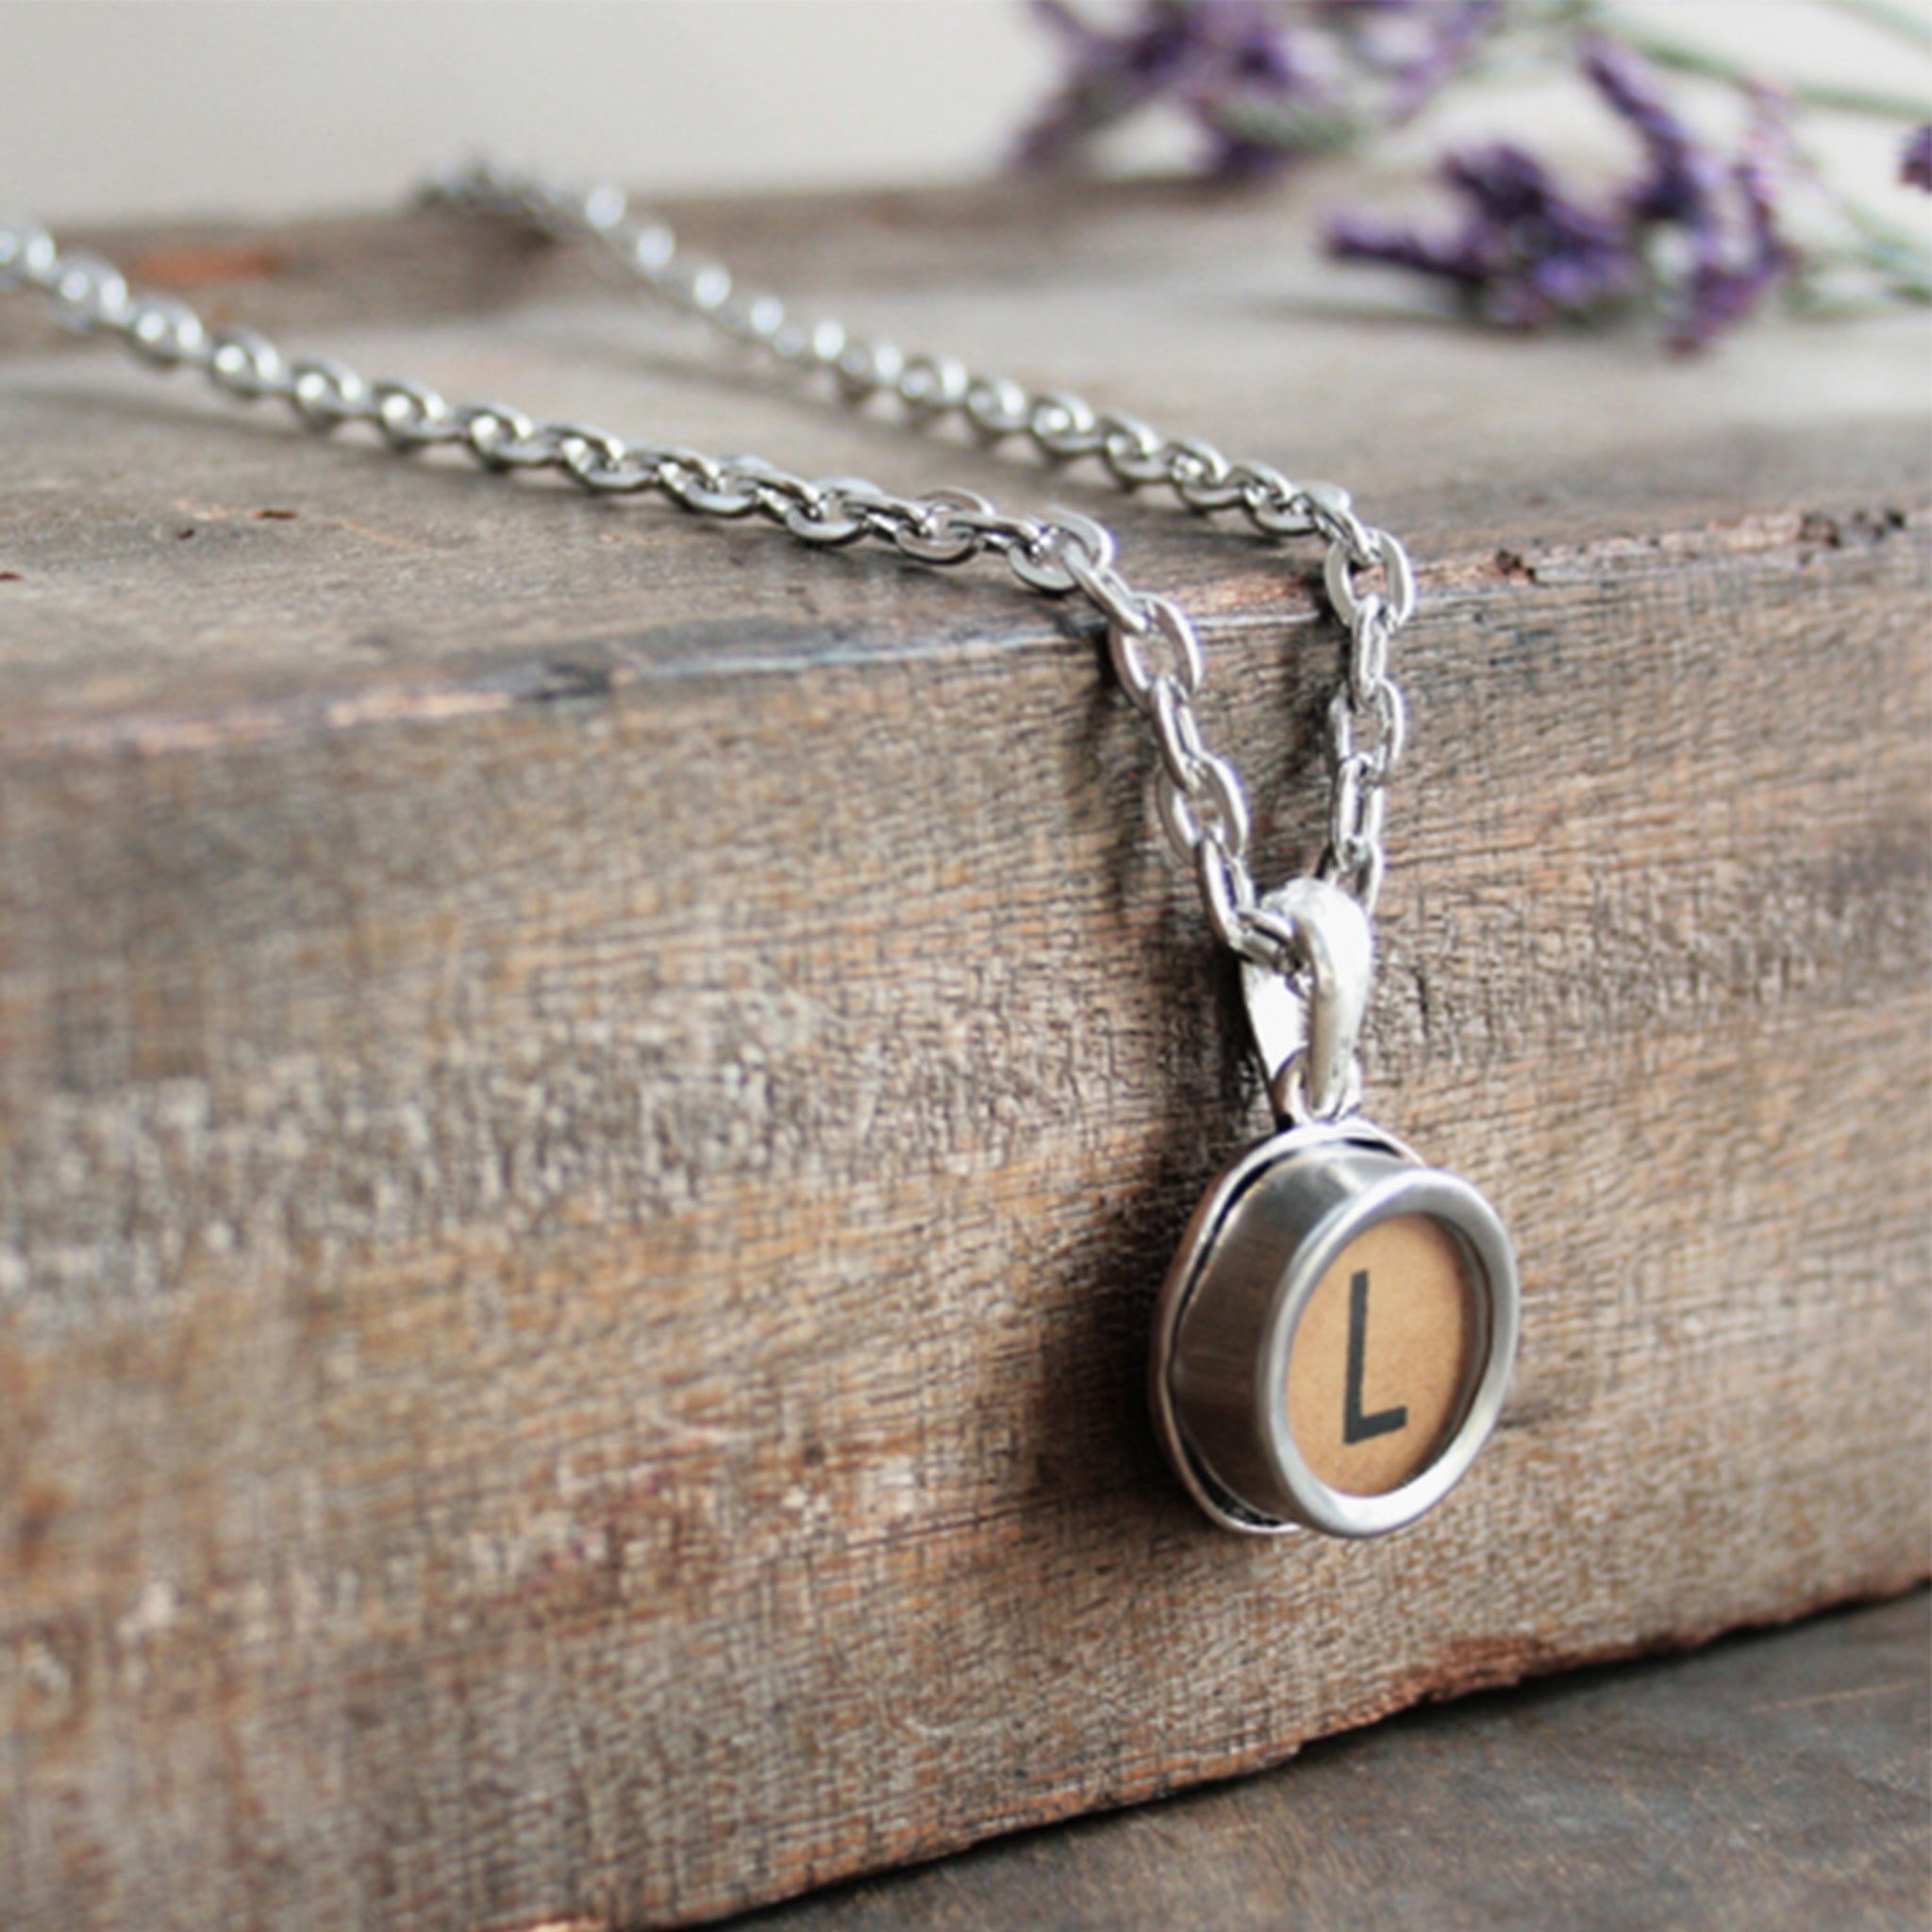 Brown L initial necklace made of real typewriter key